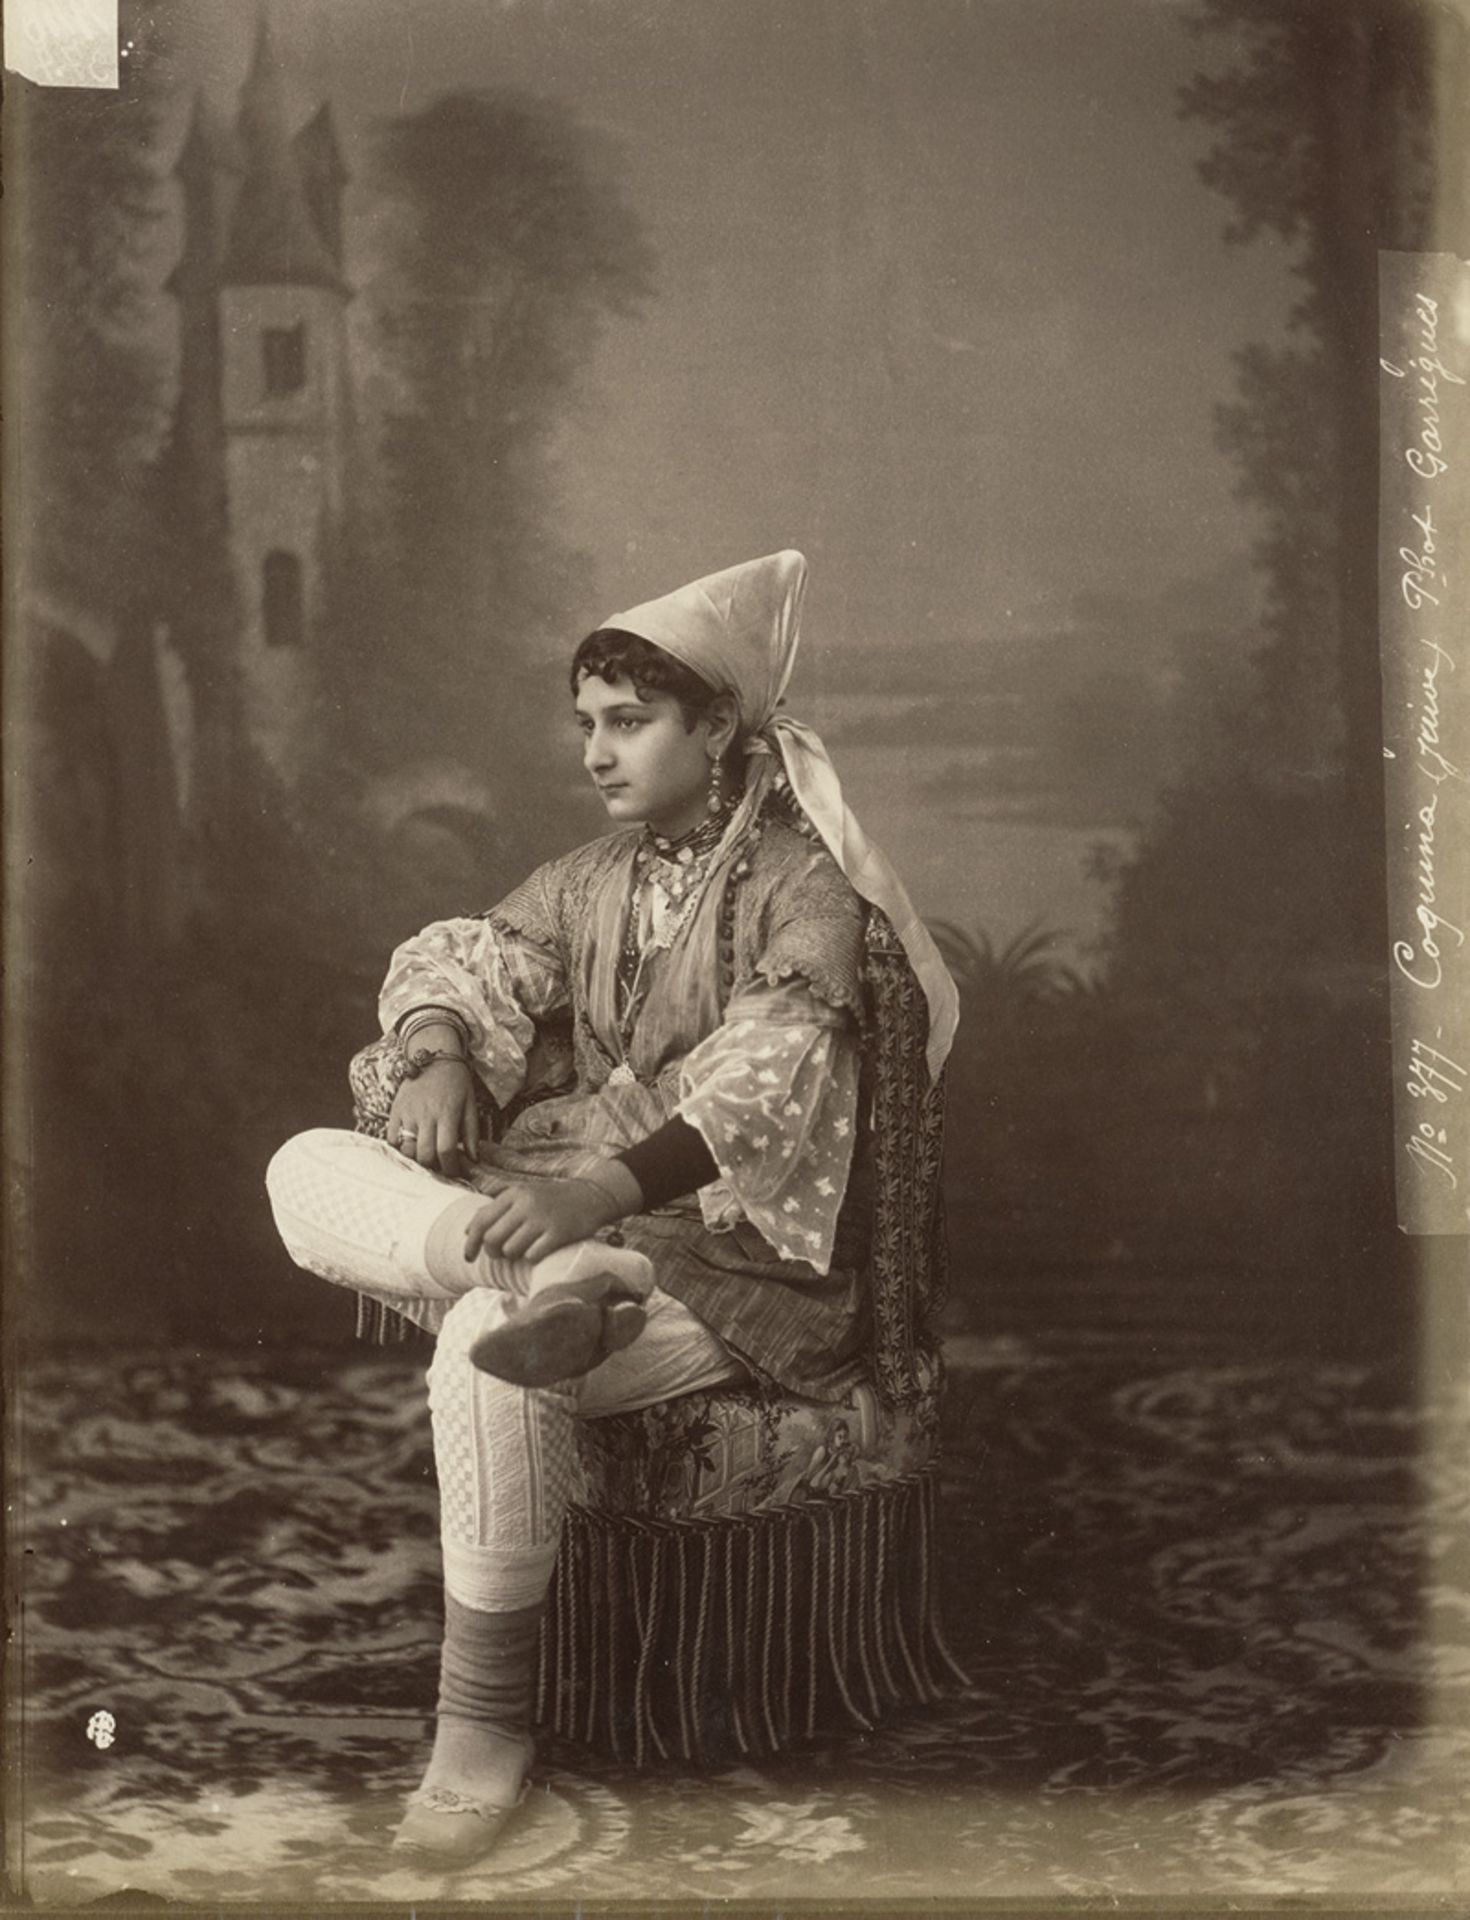 Tunis: Portraits of women and men of Tunis in traditional dress